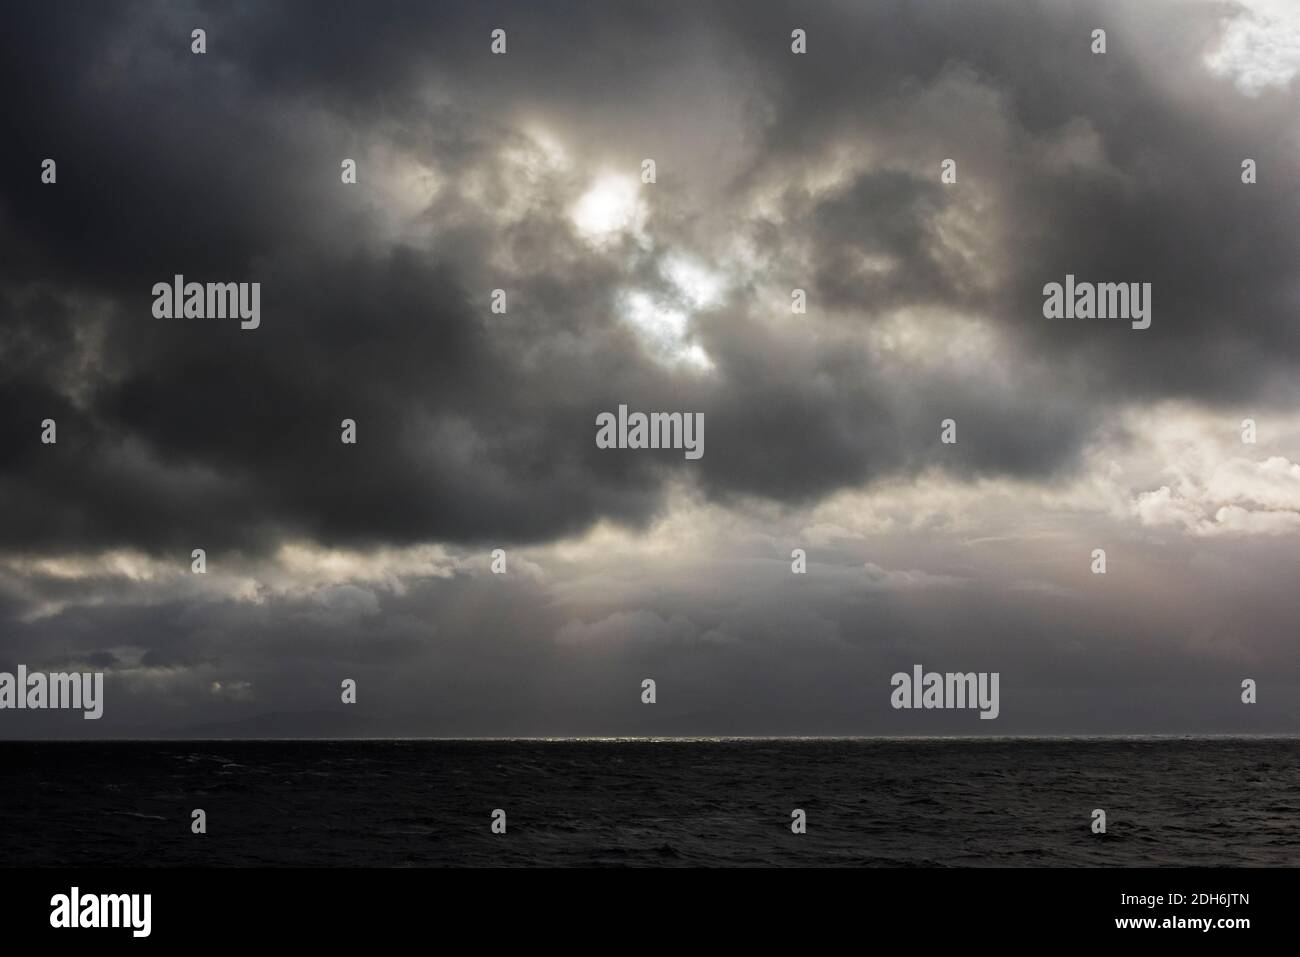 Sunlight breaking through the clouds on South Atlantic Ocean, Argentina Stock Photo